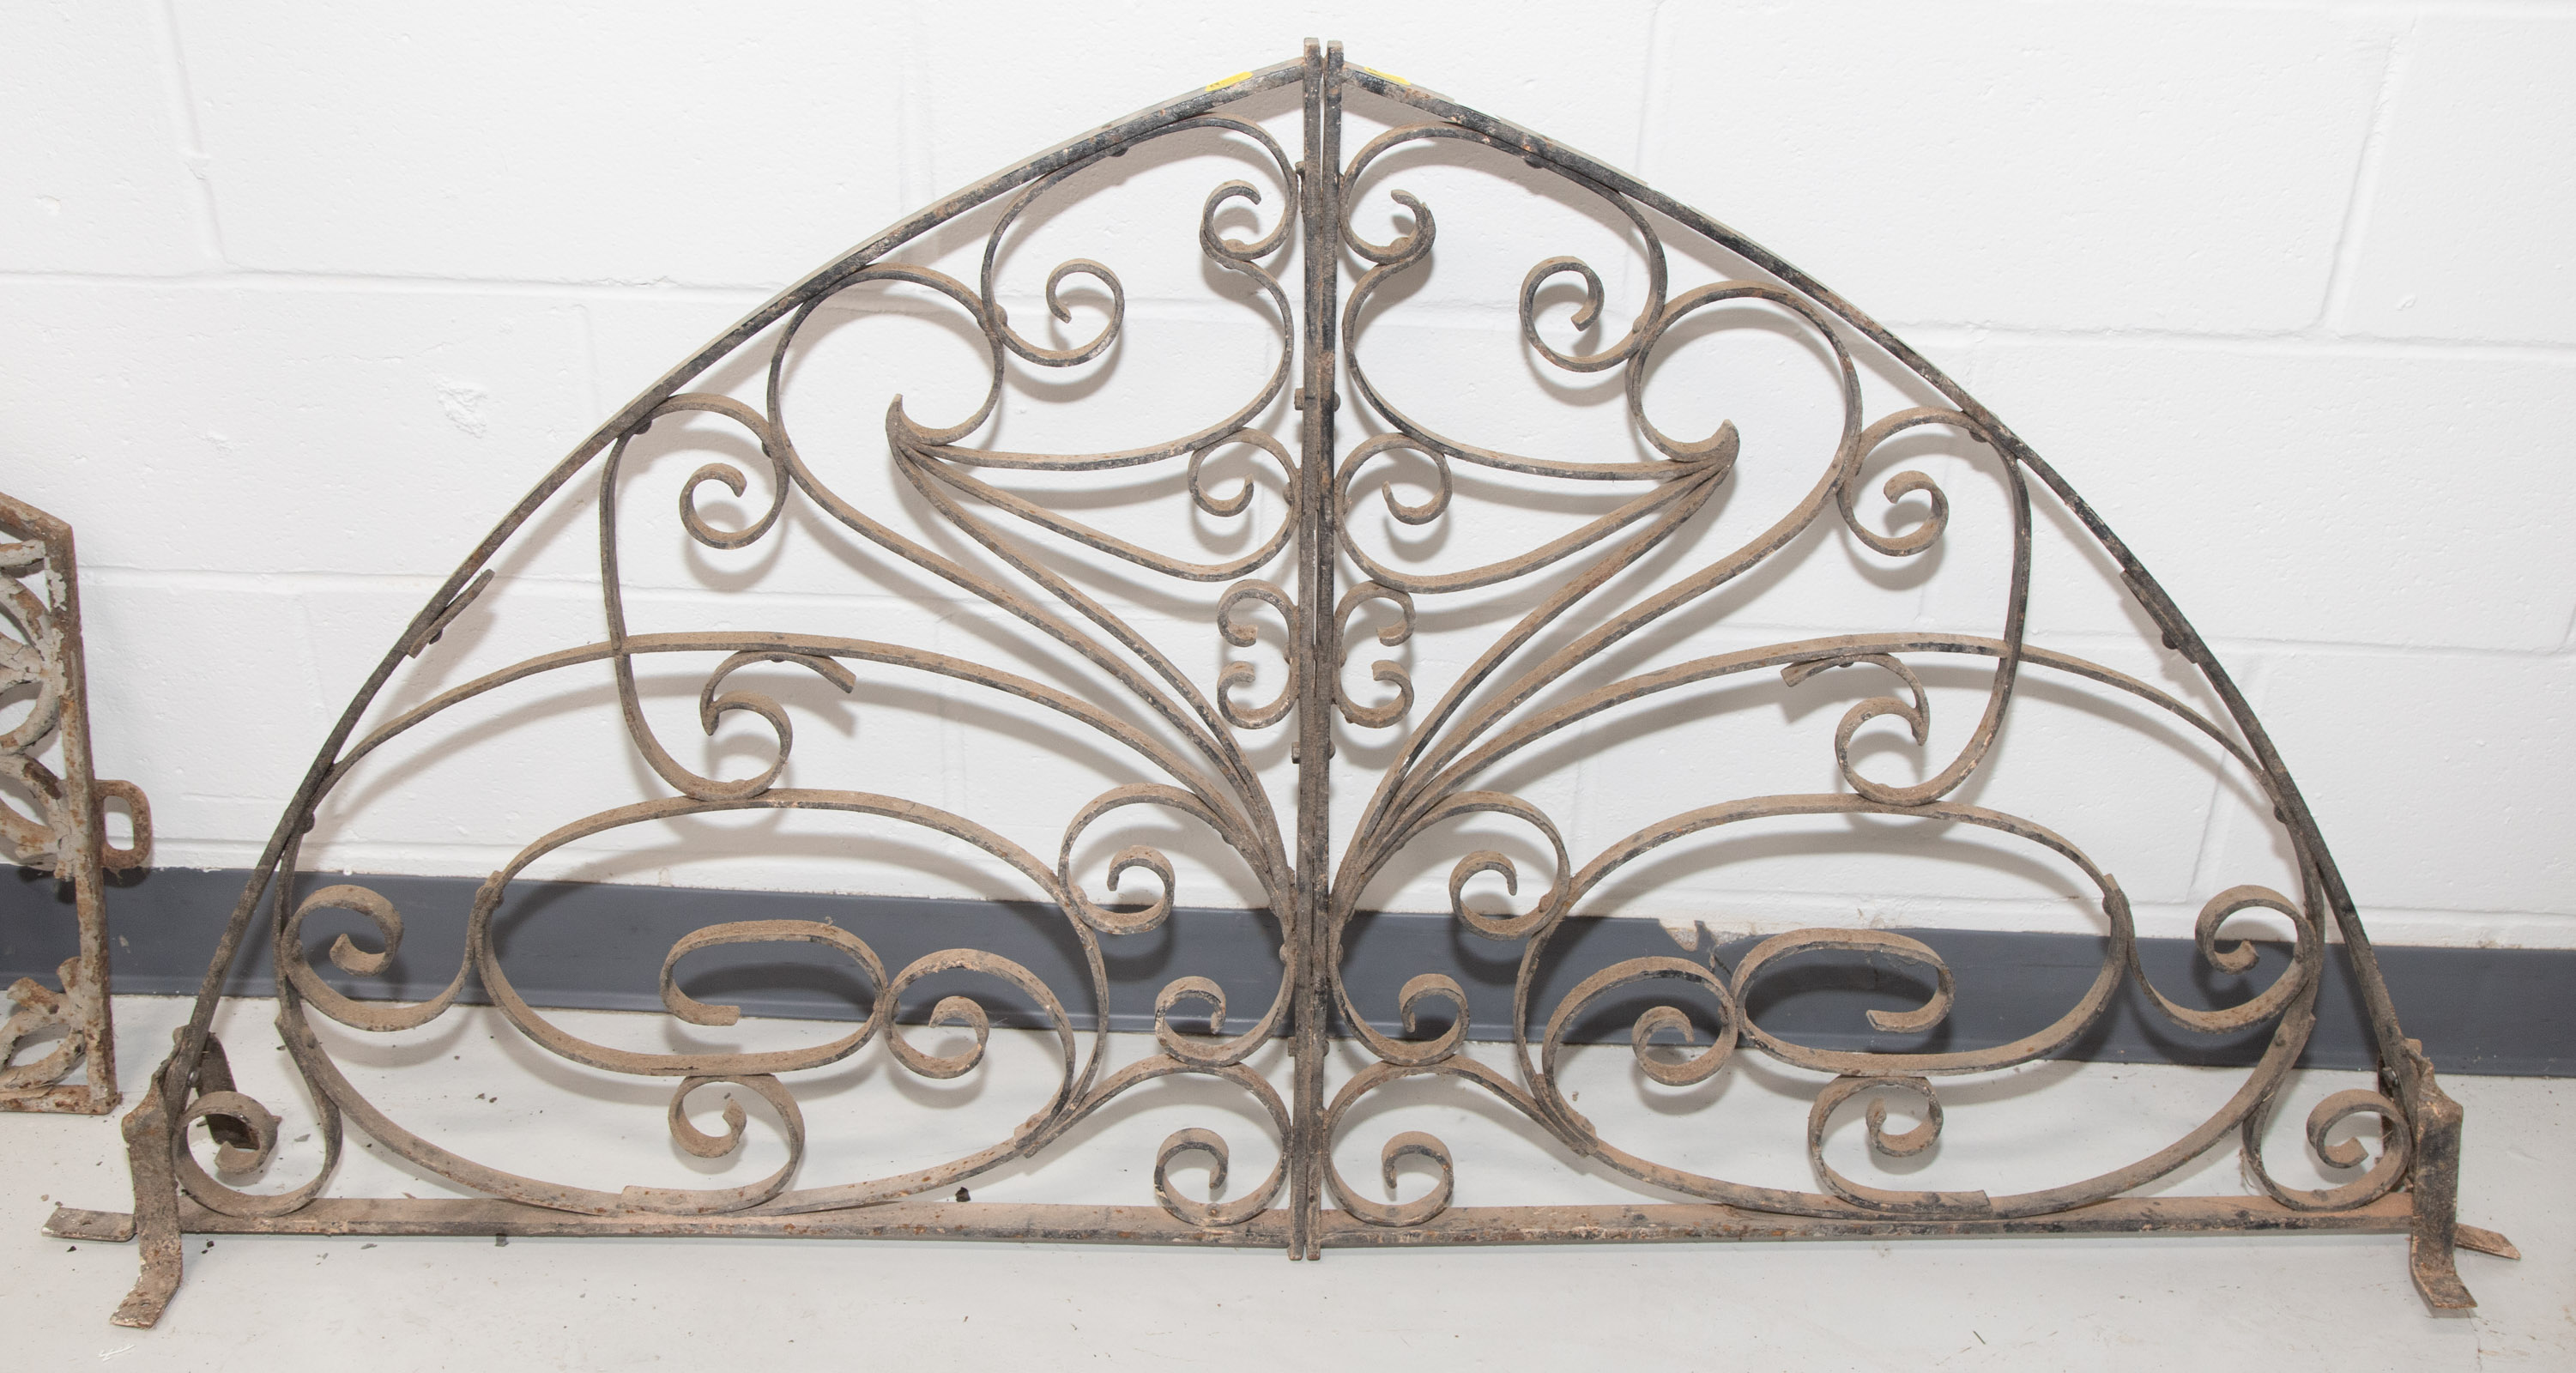 GOTHIC STYLE WROUGHT IRON ARCHITECTURAL